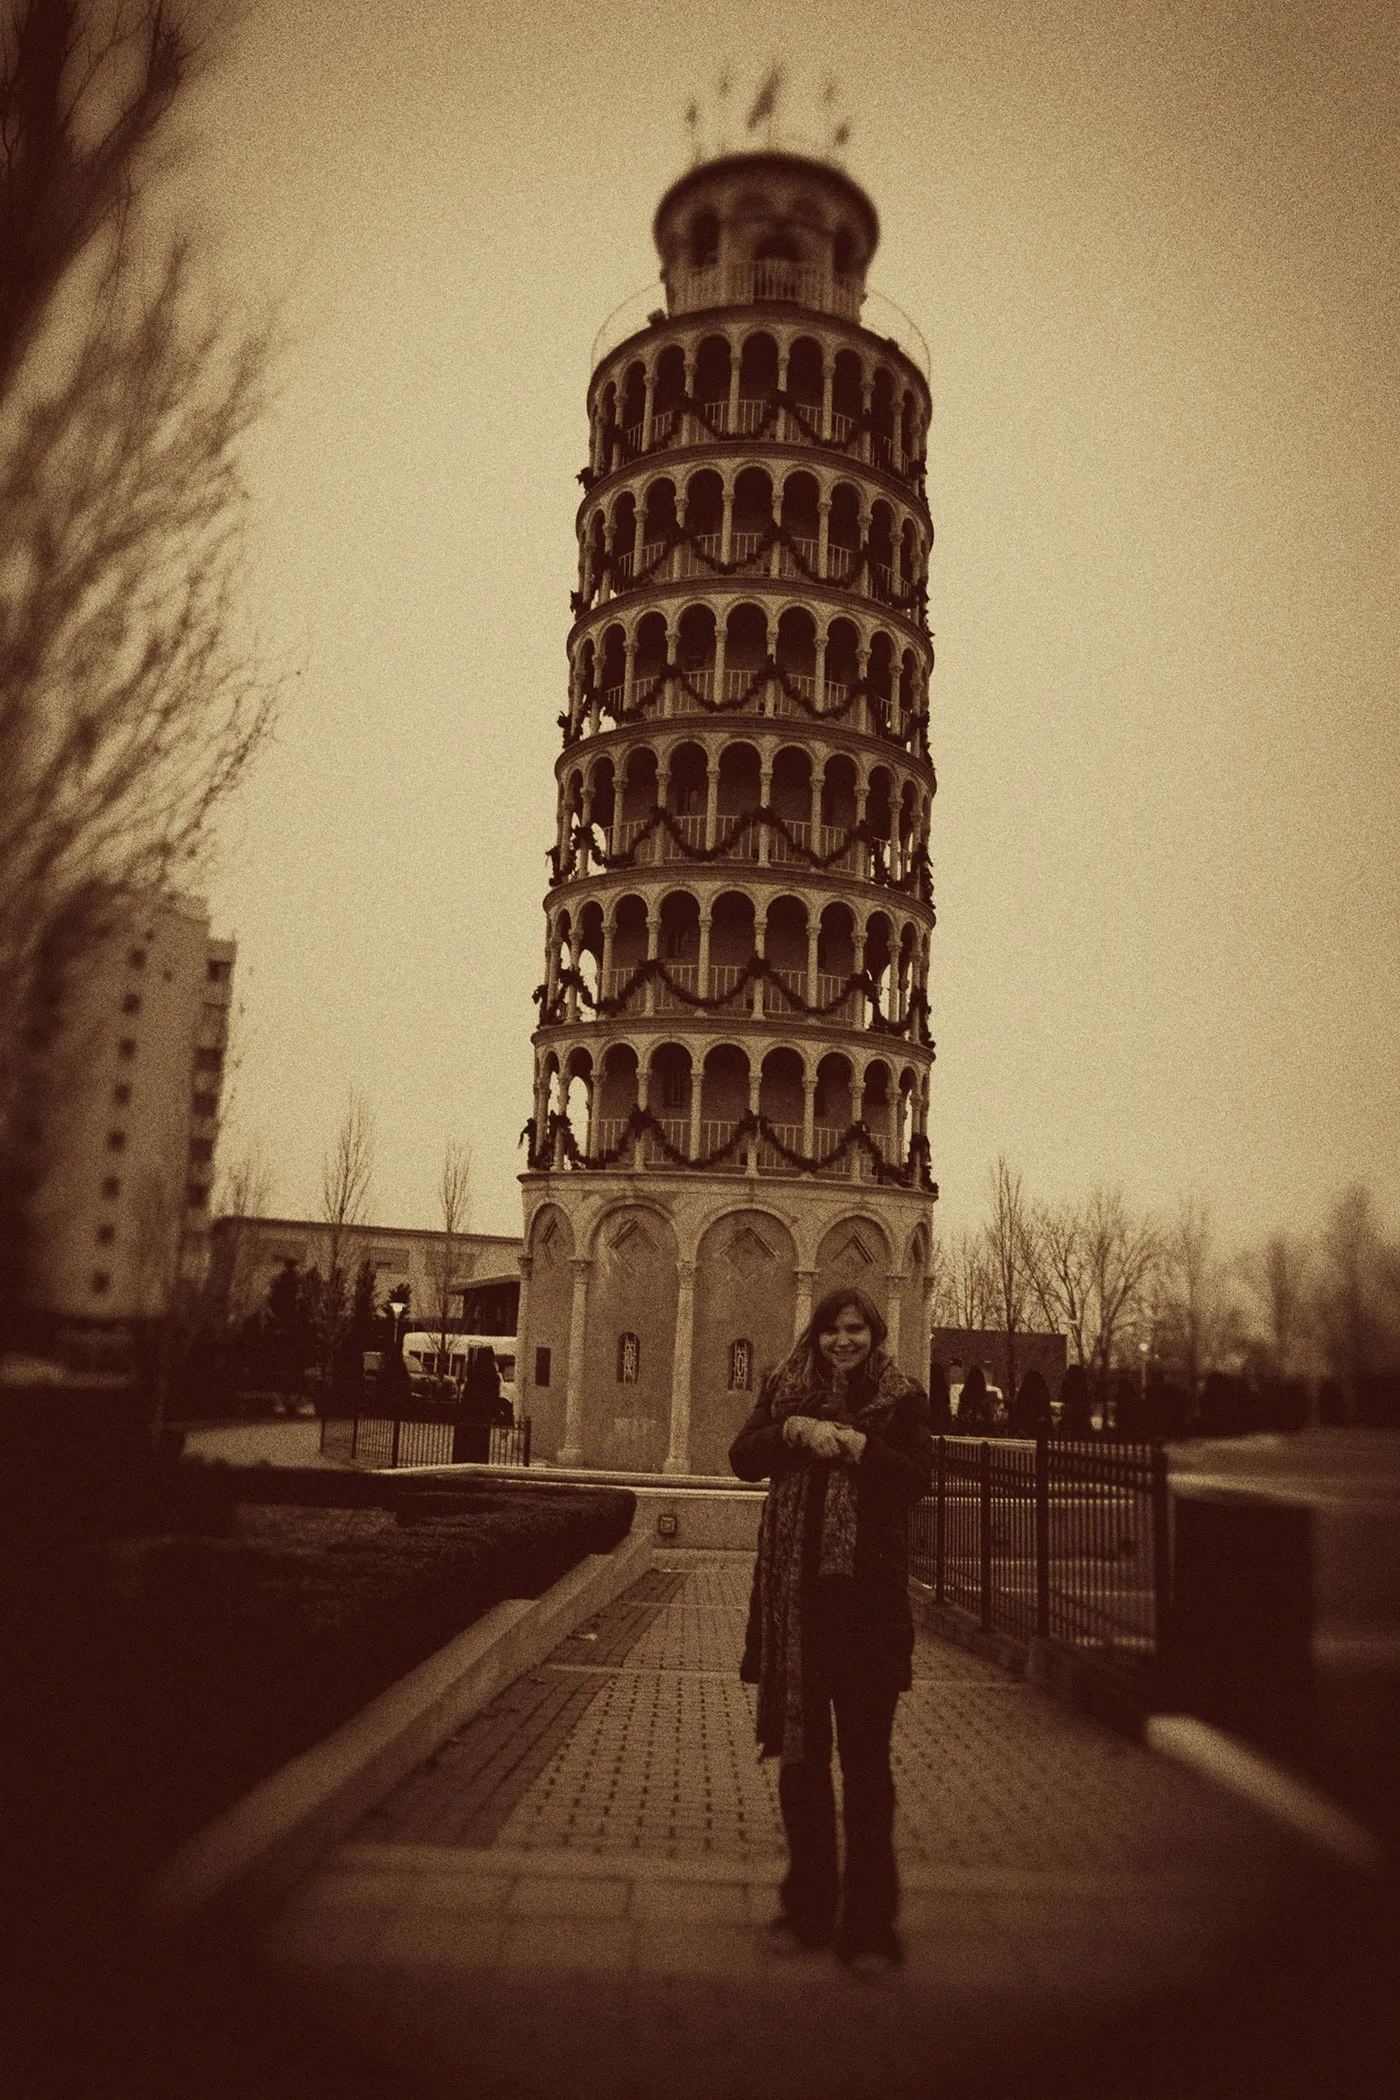 Leaning Tower of Niles - a roadside attraction in Niles, Illinois